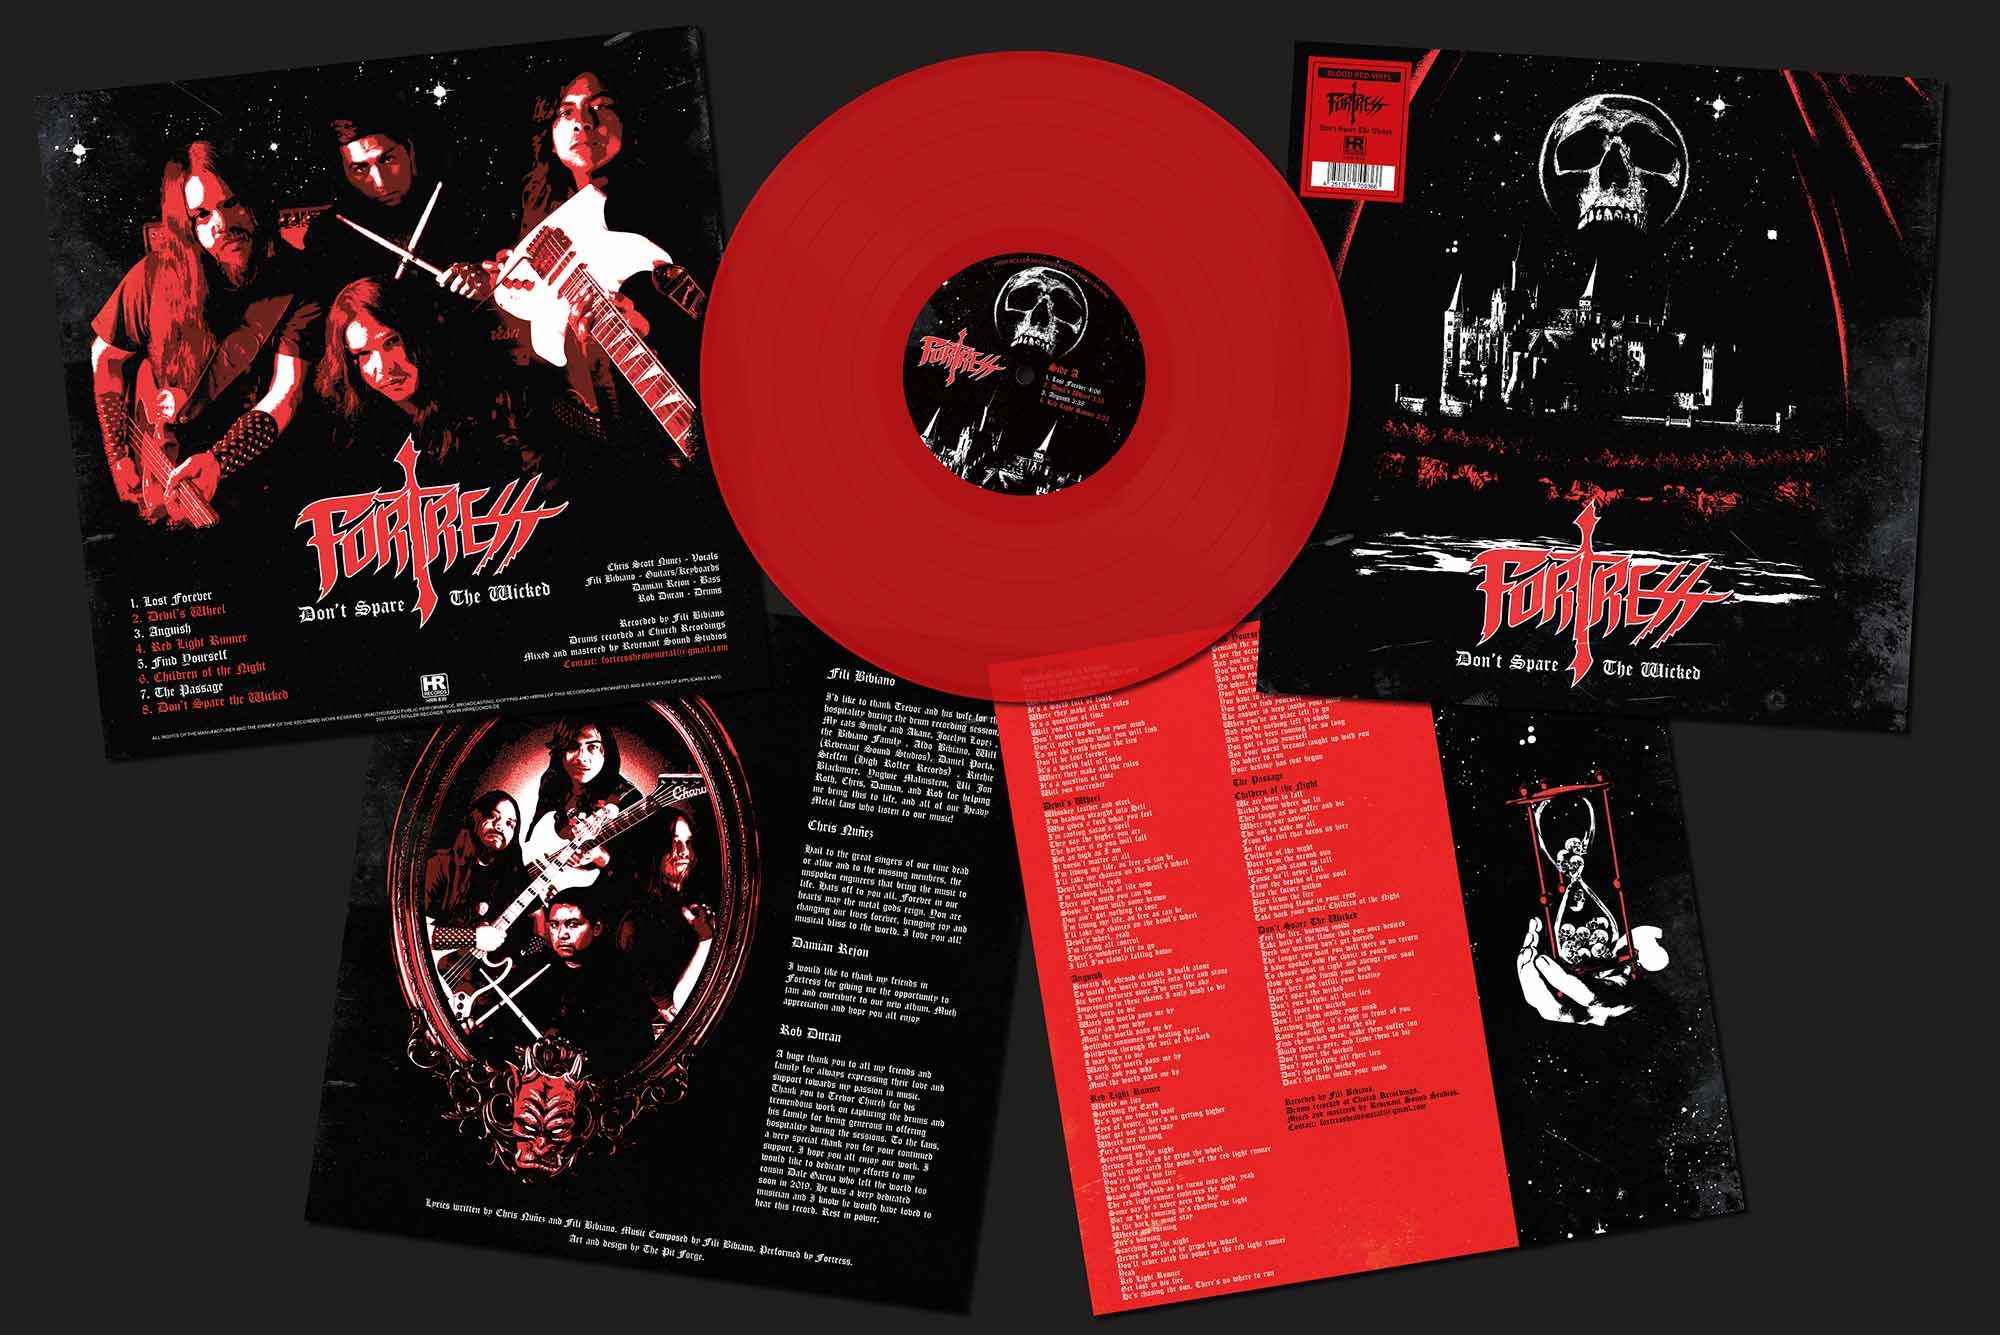 FORTRESS - Don't Spare the Wicked  LP